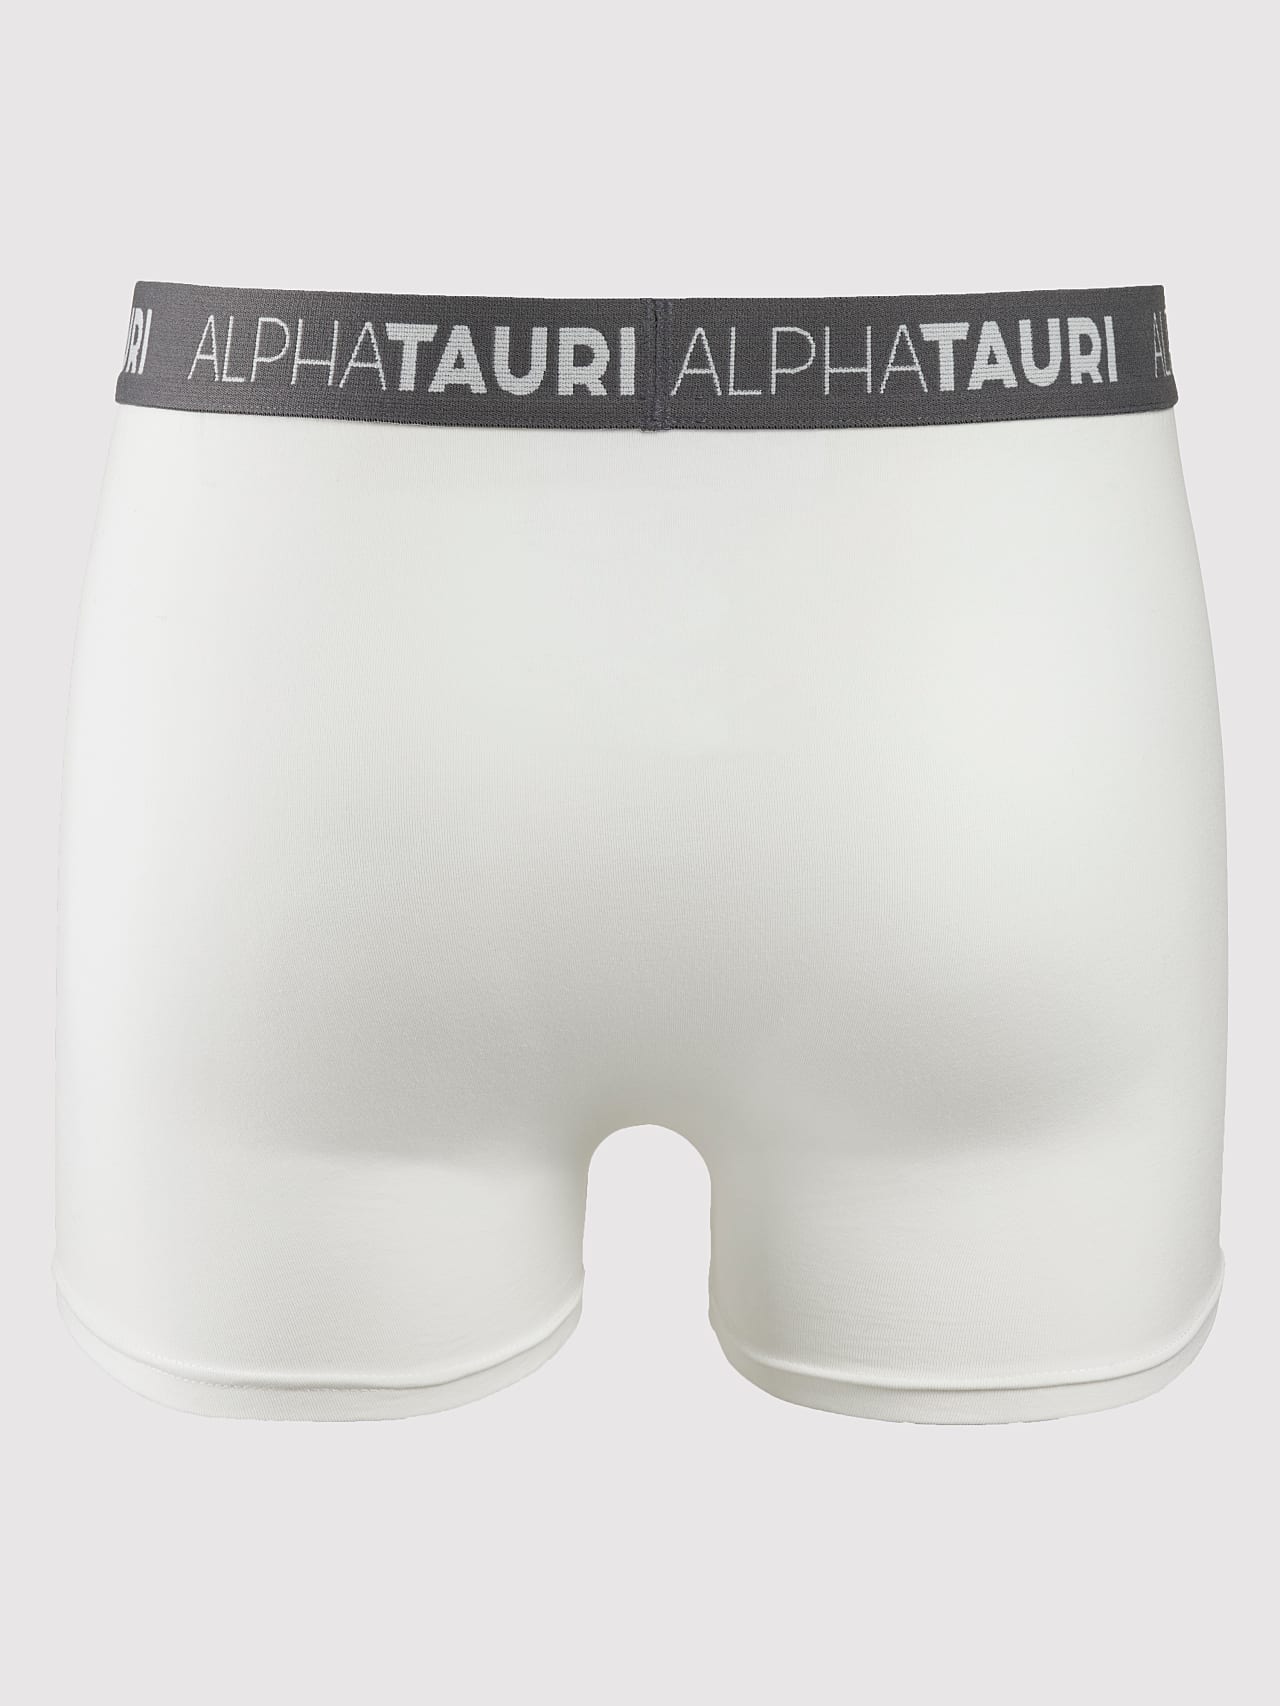 AlphaTauri | ATOXO V1.Y4.01 | Boxer Briefs 2 Pack with SILVERPLUS® in white for Men